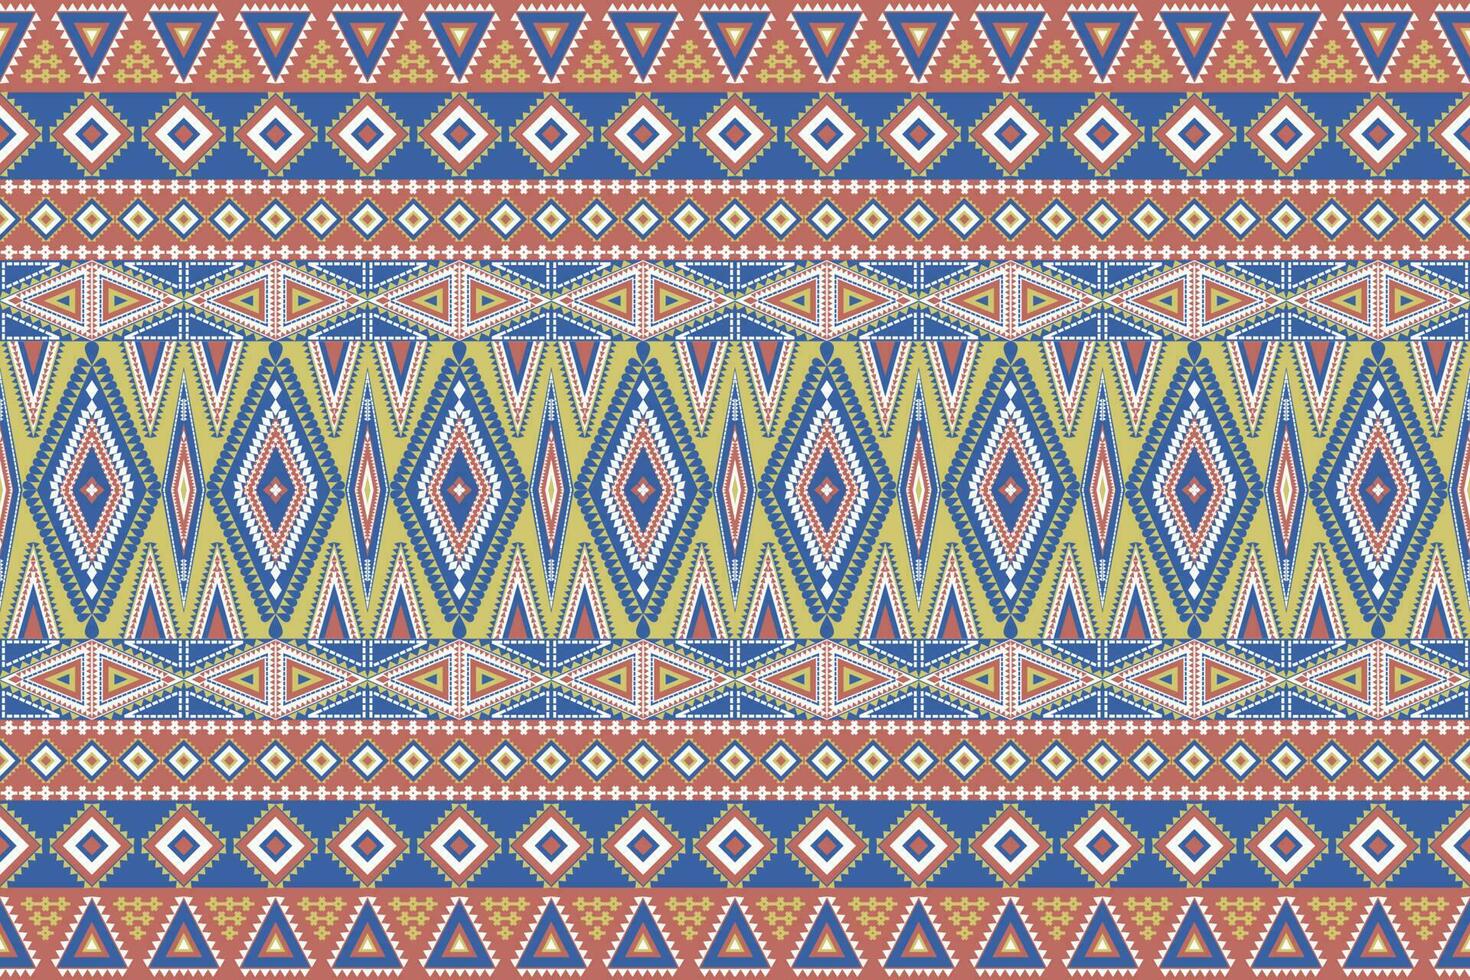 Seamless geometric ethnic asian oriental and tradition pattern design for texture and background. Silk and fabric pattern decoration for carpet, Thai clothing, wrapping and wallpaper vector